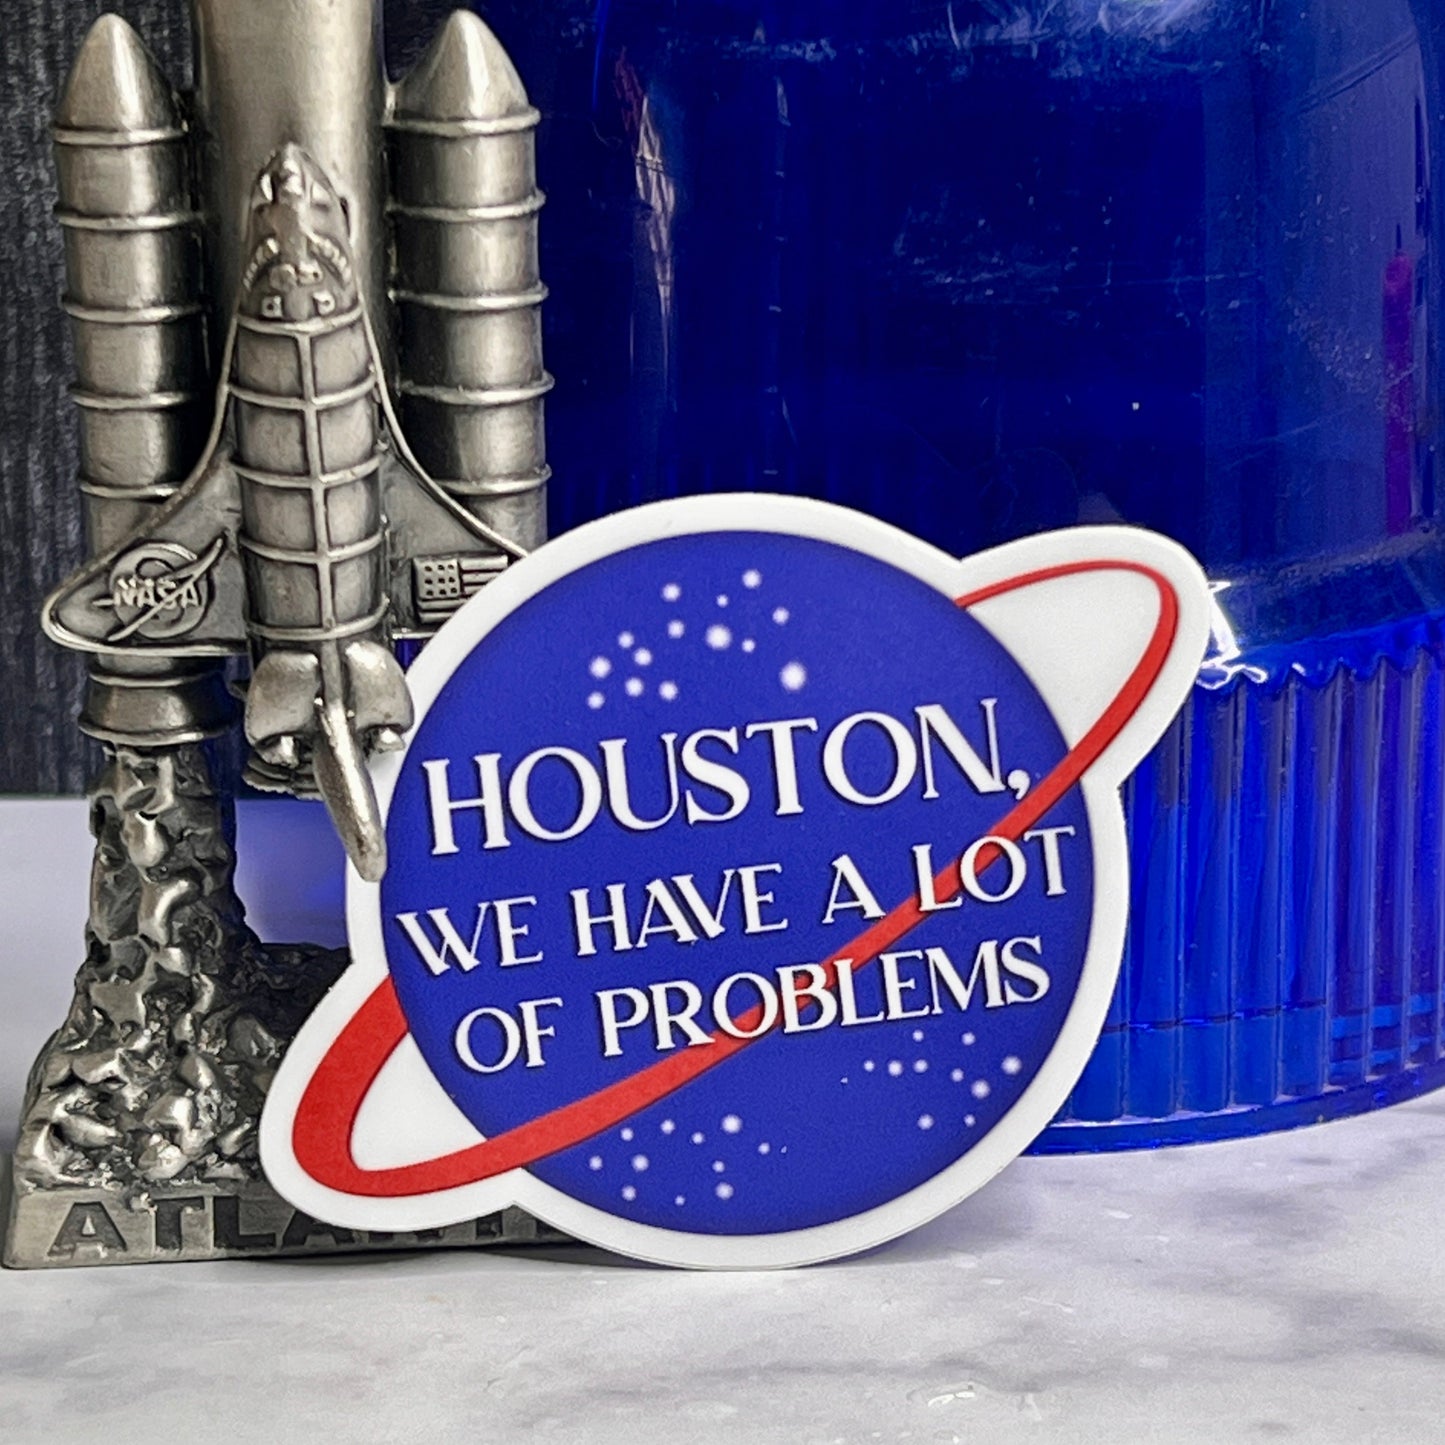 Houston, We Have A Lot of Problems Waterproof Sticker Decal